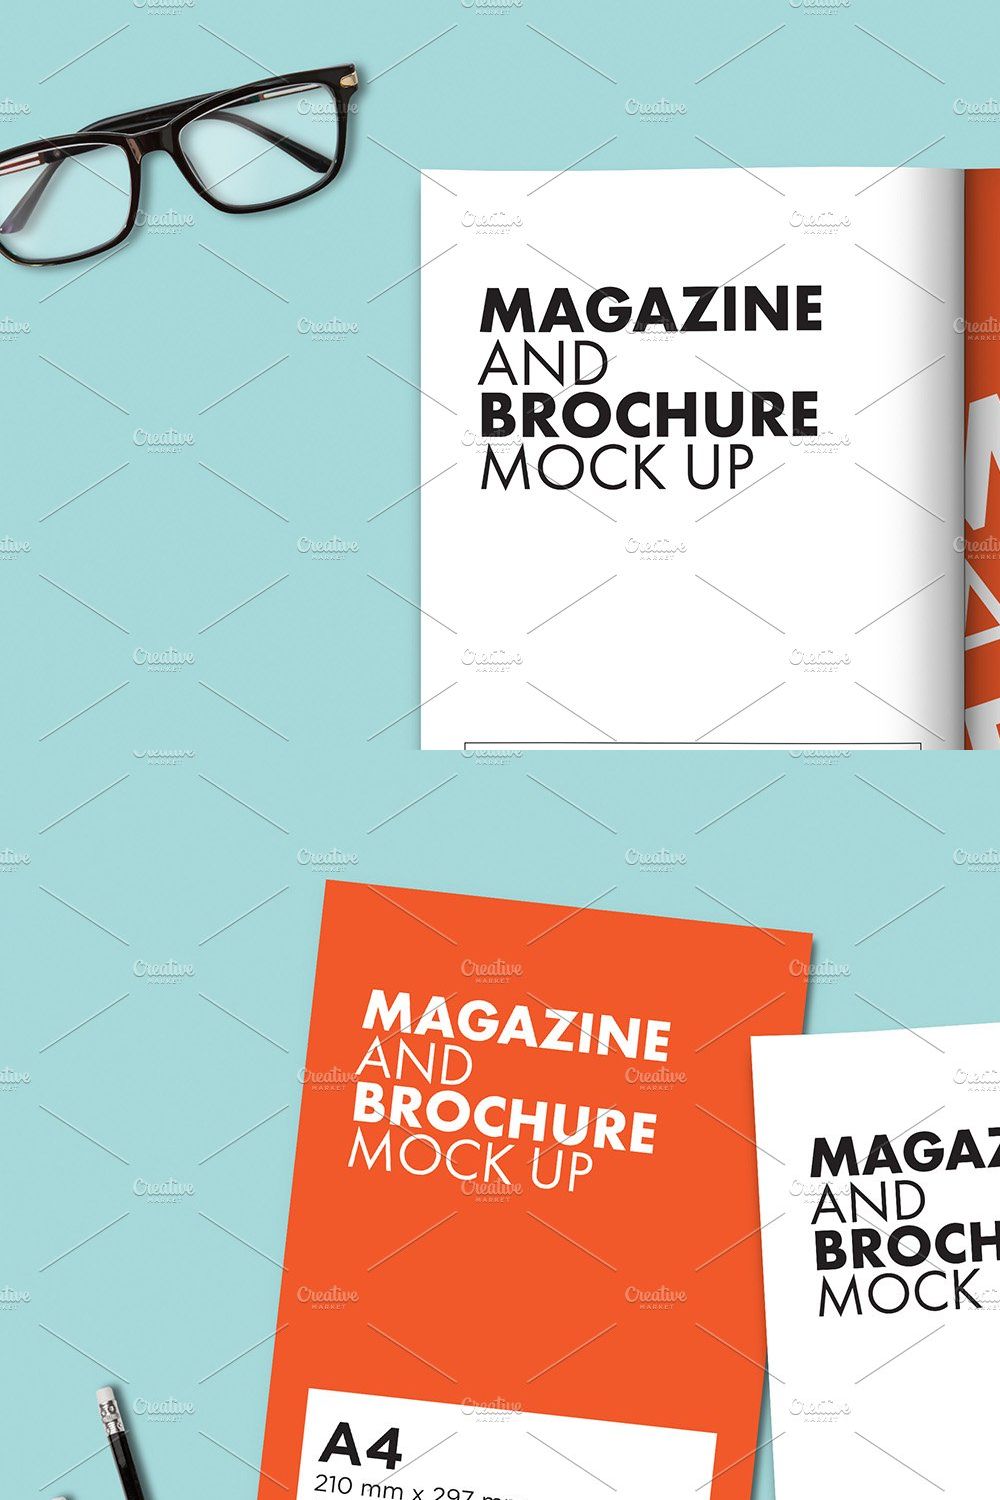 A4 Brochure and Magazine mock-up pinterest preview image.